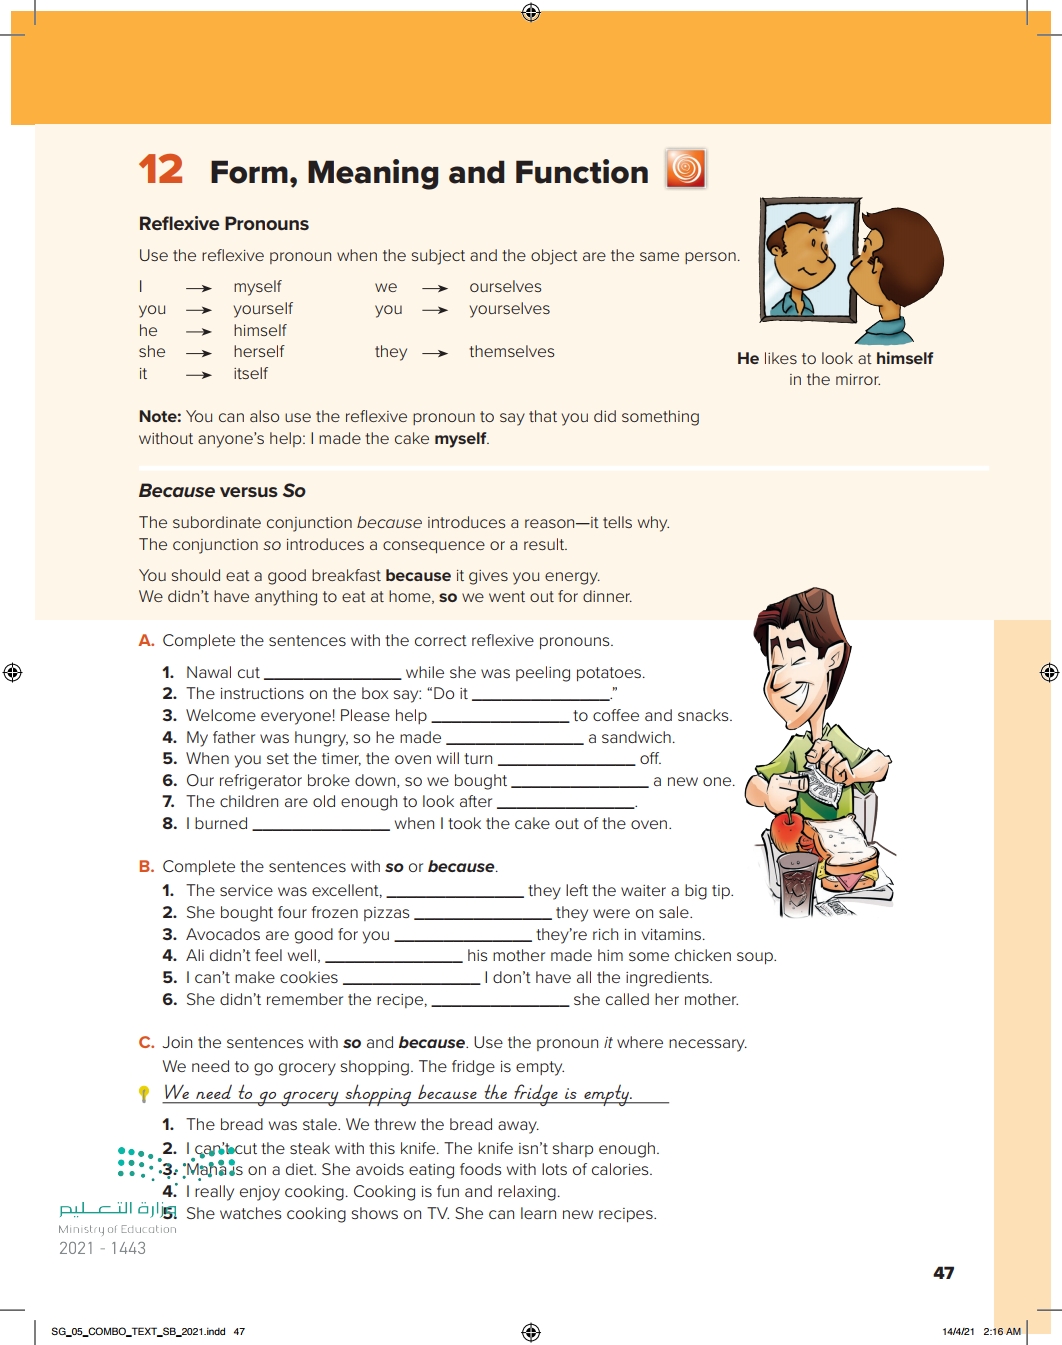 Form, Meaning and Function